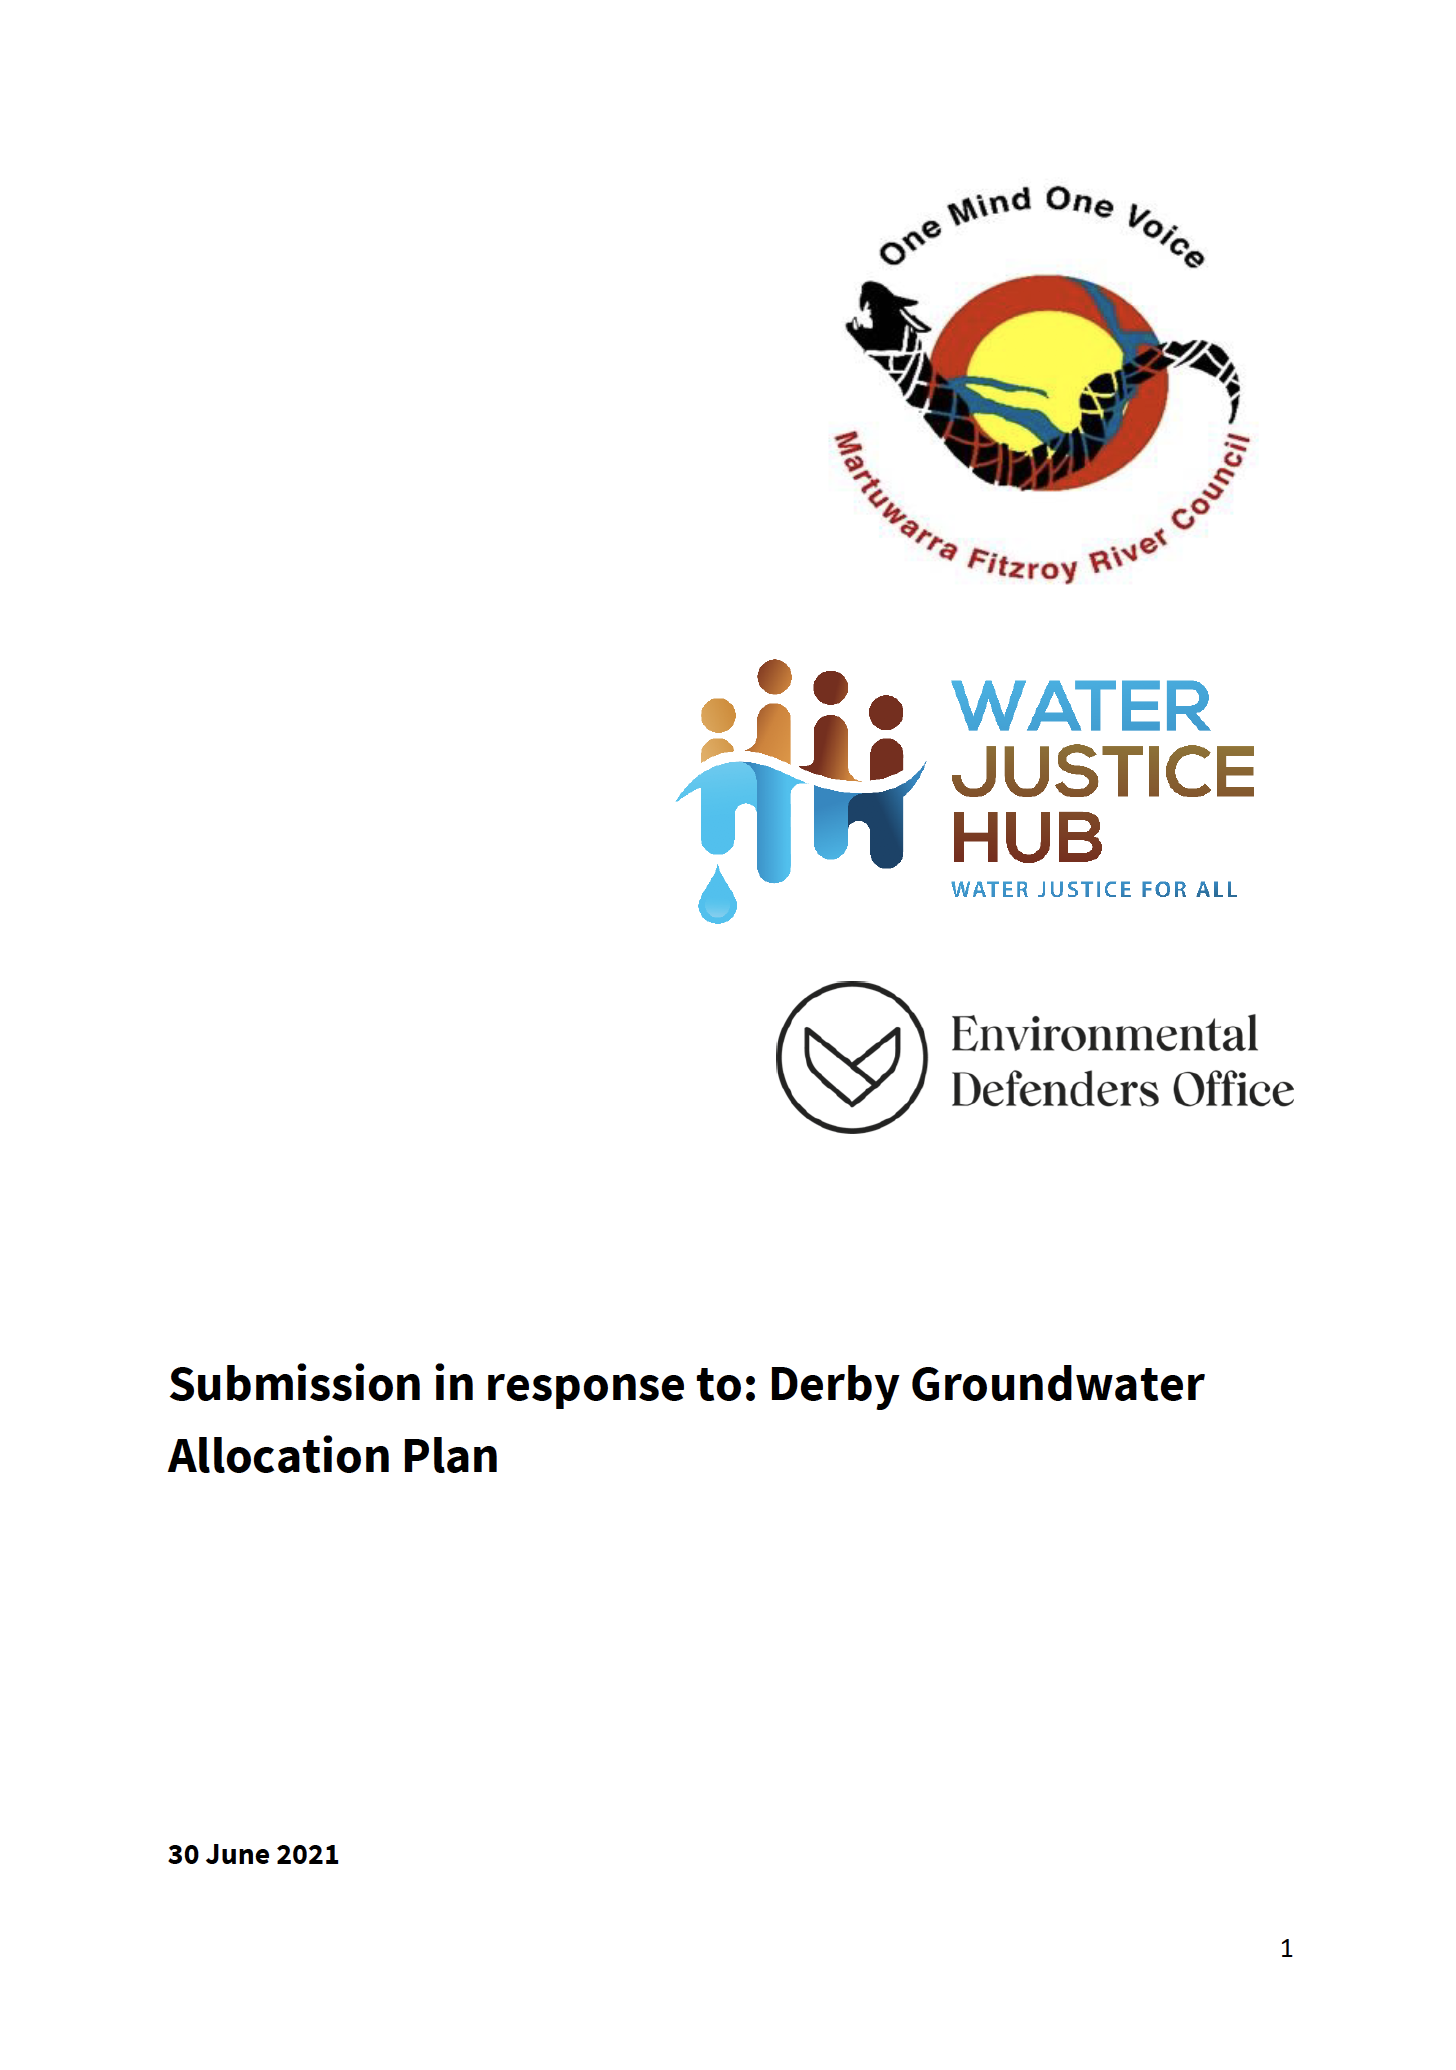 Download the PDF here - Martuwarra Fitzroy River Council has partnered with the Environmental Defenders Office and the ANU Water Justice Hub. Read our submission to the WA Government in response to the Derby Groundwater Allocation Plan.Citation RiverOfLife, M., Poelina, A., Butterly, L., Carmody, E., Perdrisat, M., Taylor, K., Manero, A., Grafton, Q., Williams, J. (2021) Submission in response to: Derby Groundwater Allocation Plan. DOI: 10.6084/m9.figshare.15131439